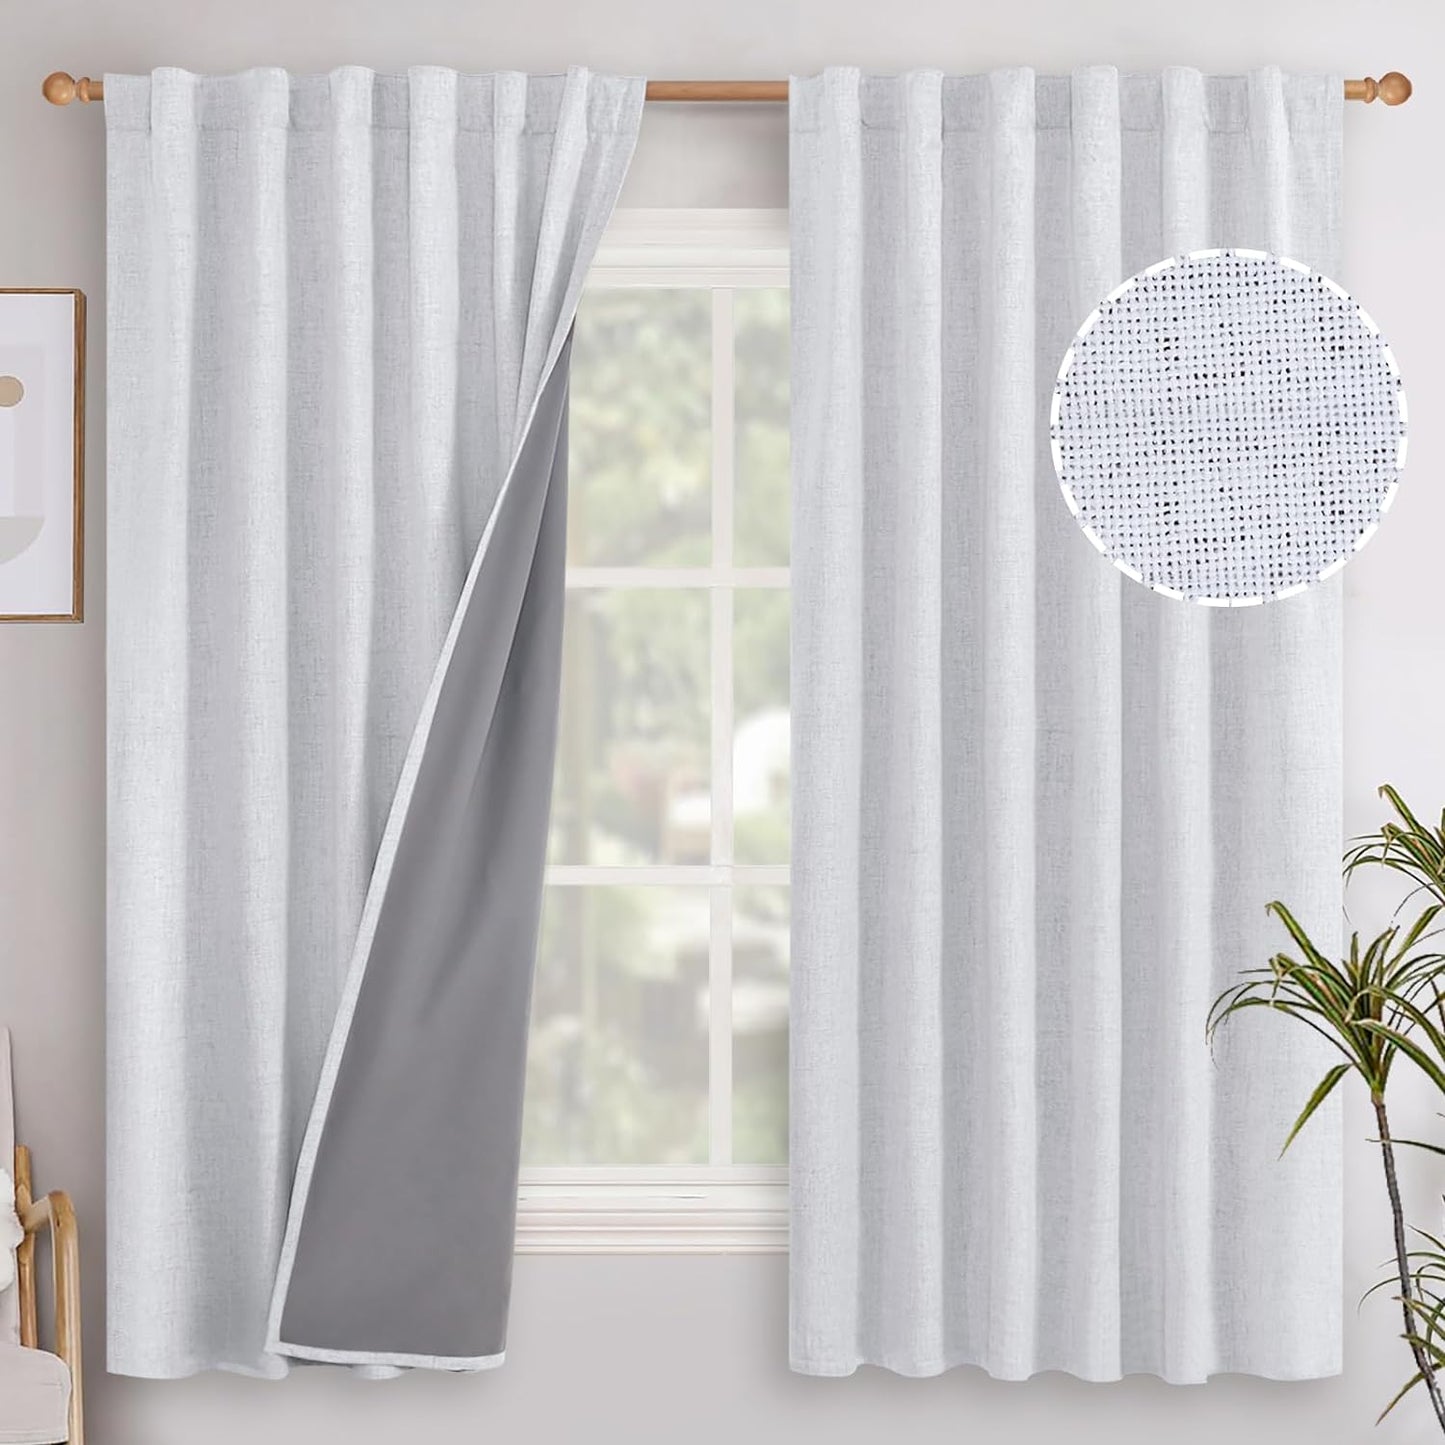 Youngstex Linen Blackout Curtains 63 Inch Length, Grommet Darkening Bedroom Curtains Burlap Linen Window Drapes Thermal Insulated for Basement Summer Heat, 2 Panels, 52 X 63 Inch, Beige  YoungsTex Back Tab/White 52W X 63L 